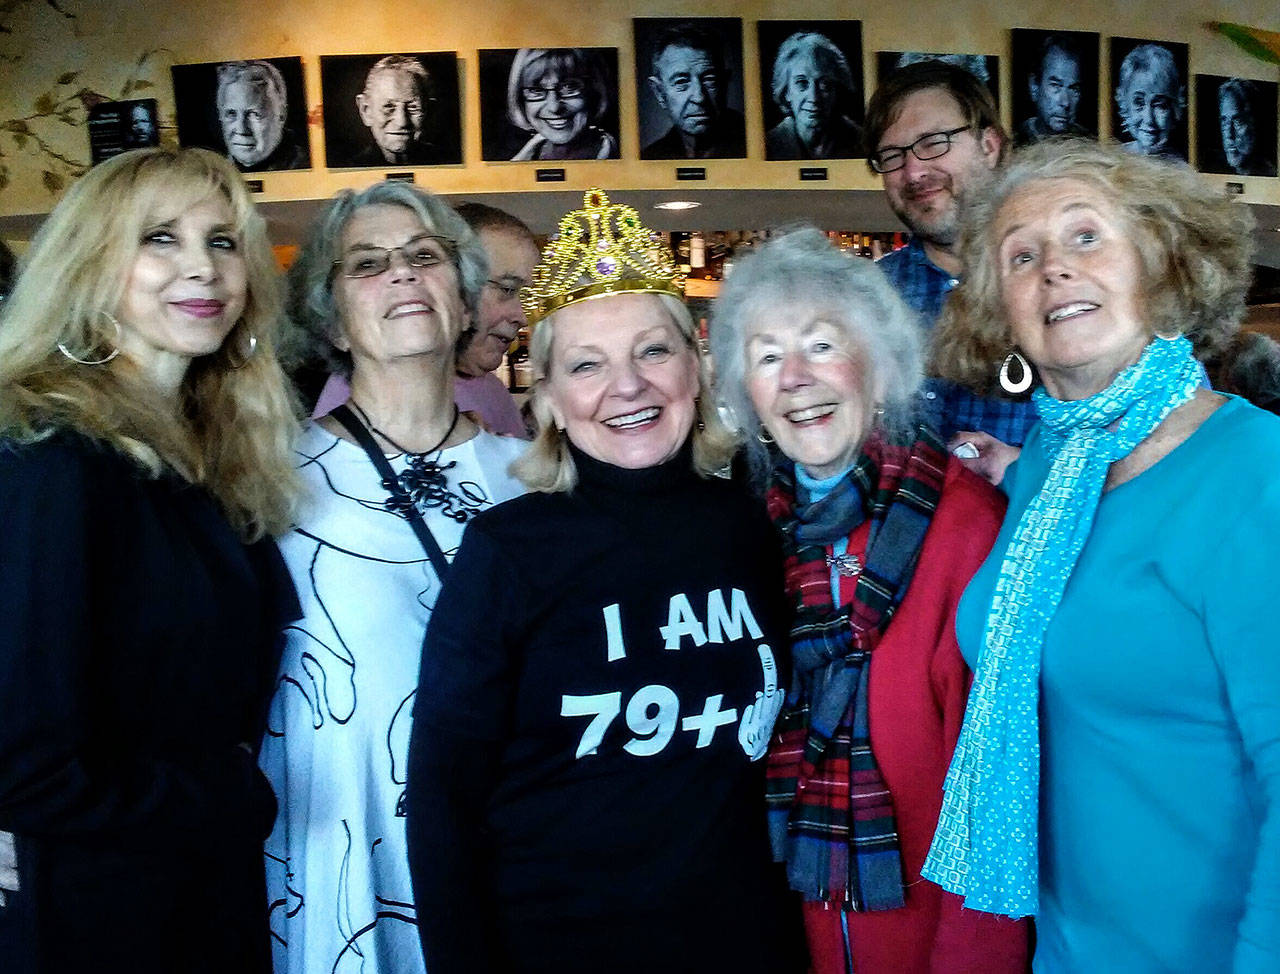 More than four dozen friends surprised Cynthia Tilkin recently for her 80th birthday celebration at Village Pizzeria. The party was organized by staff for her store, In The Country. Surrounding the birthday gal (wearing the crown) are Fiorella Coleman (left), Suzanne Dobrin, Kitty Walker (right of Tilkin) and Susanne La Chasse (far right). (Photo provided)